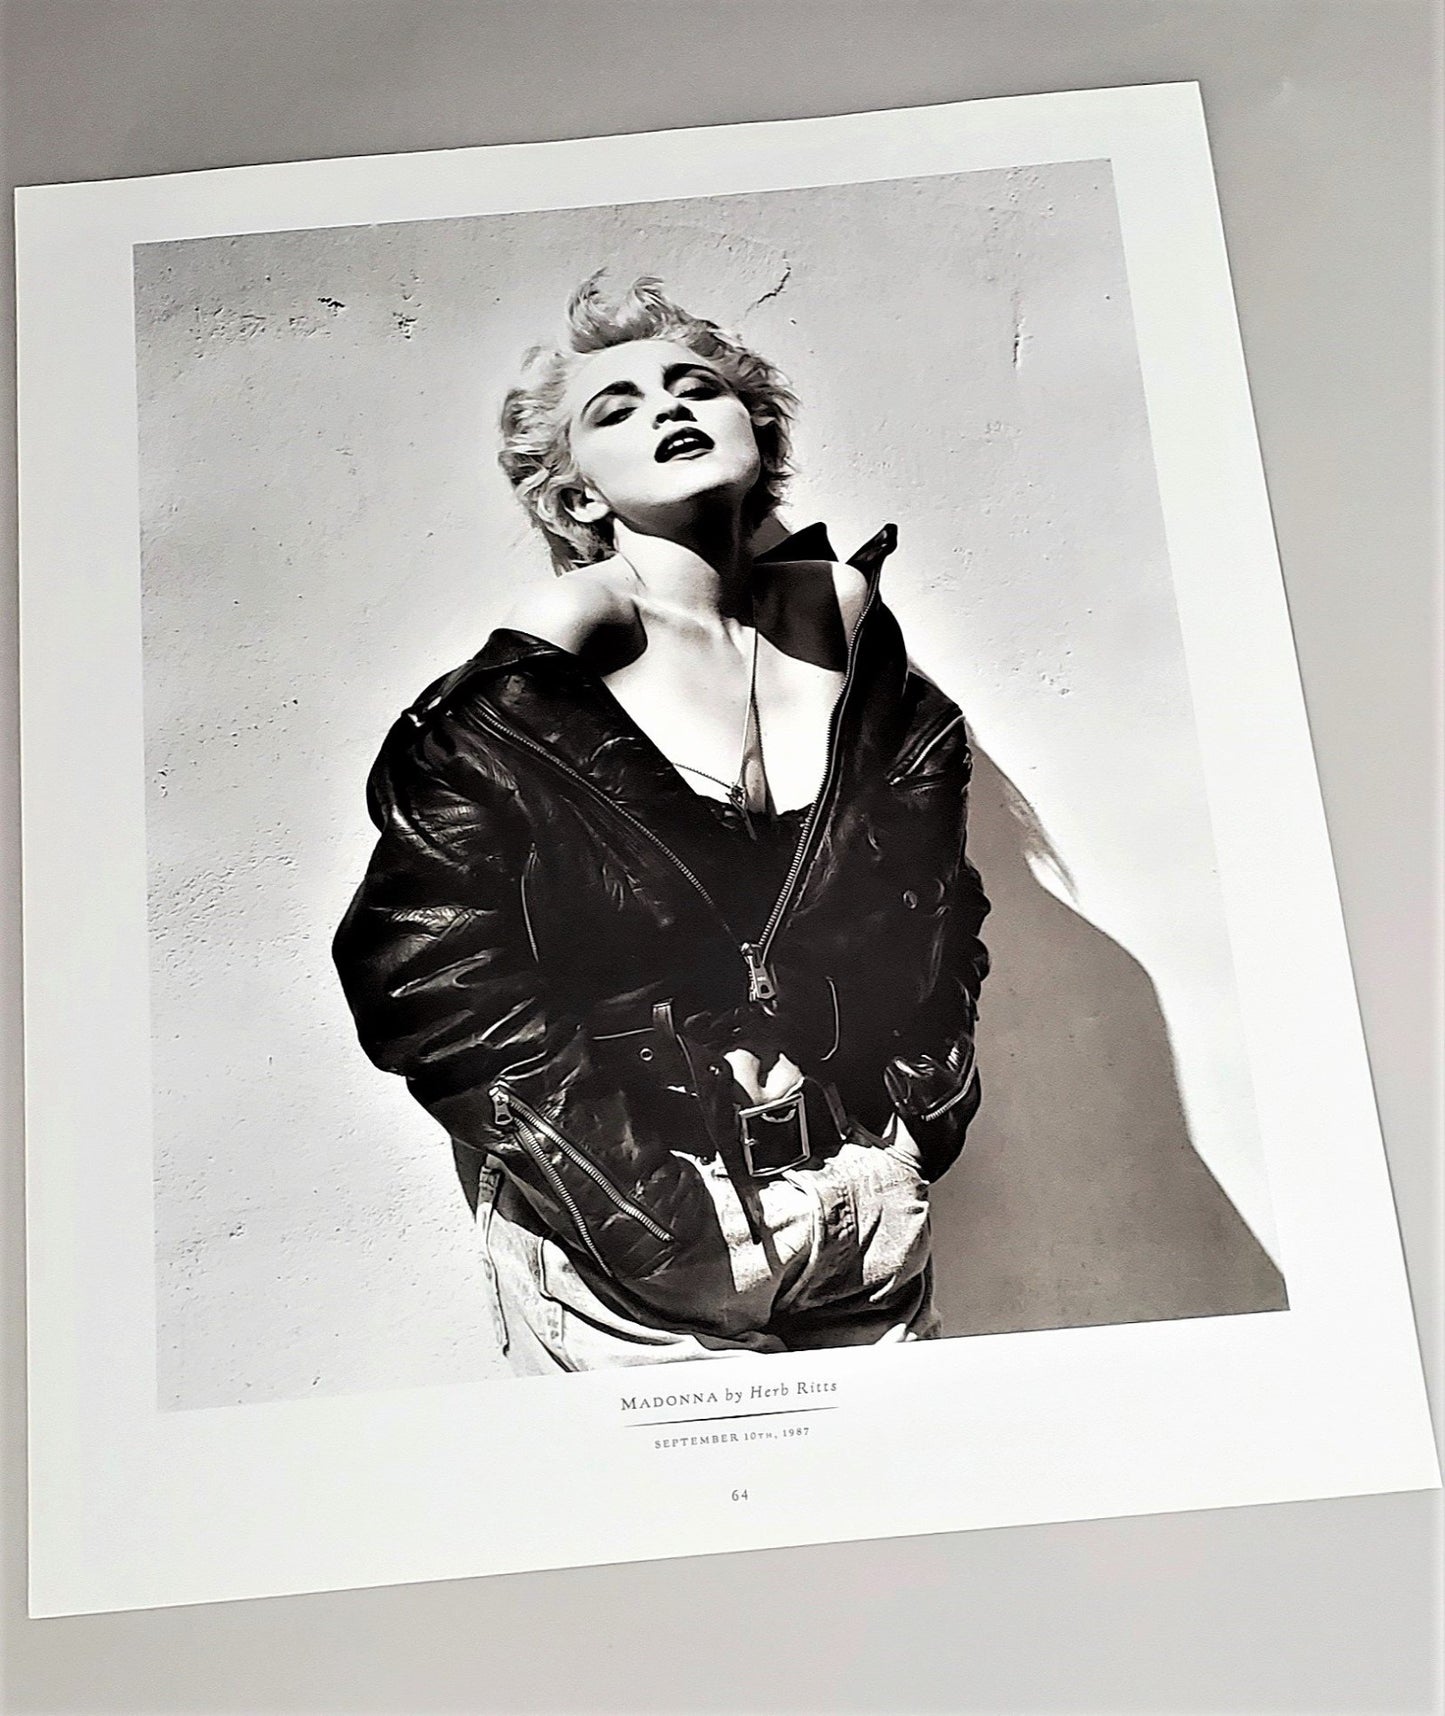 Madonna photographed by Herb Ritts in 1987 featured in 1989 Rolling Stone: The Photographs book